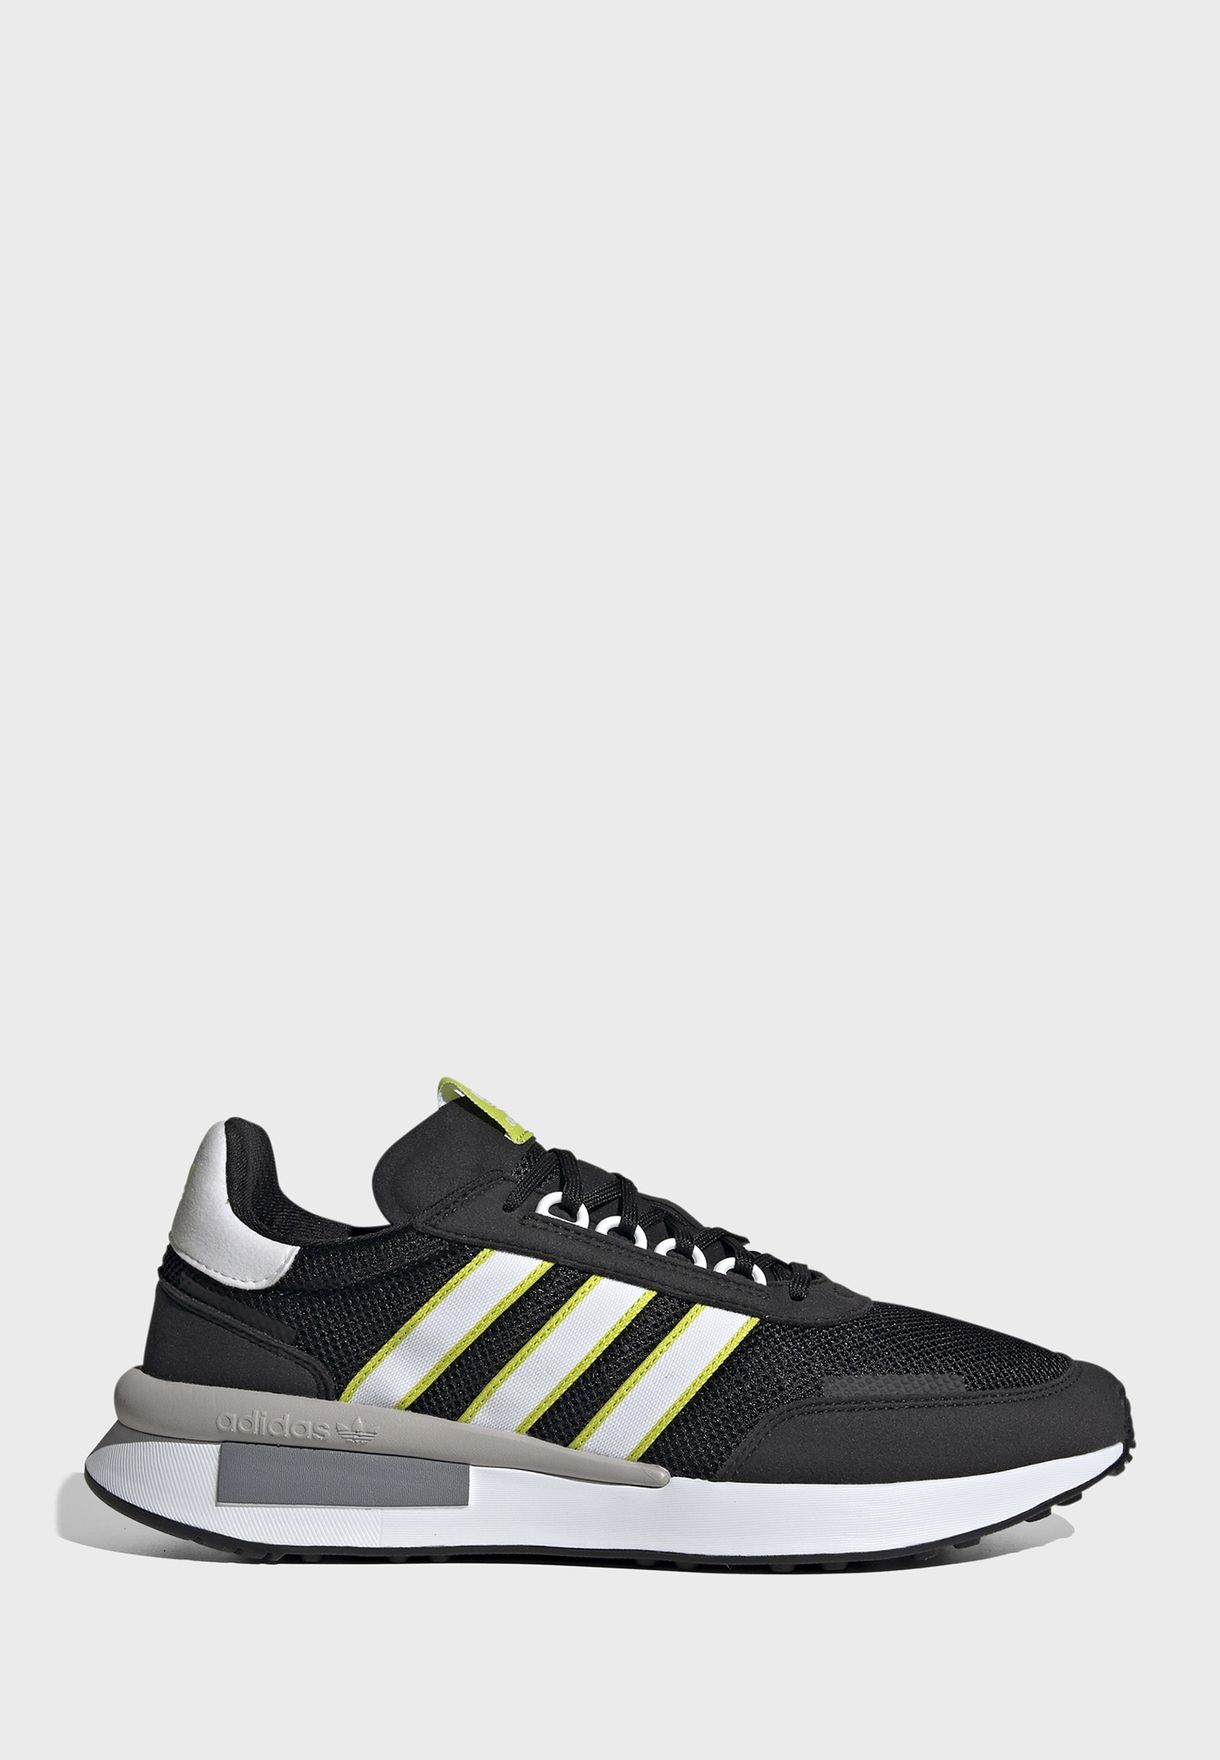 buy adidas casual shoes